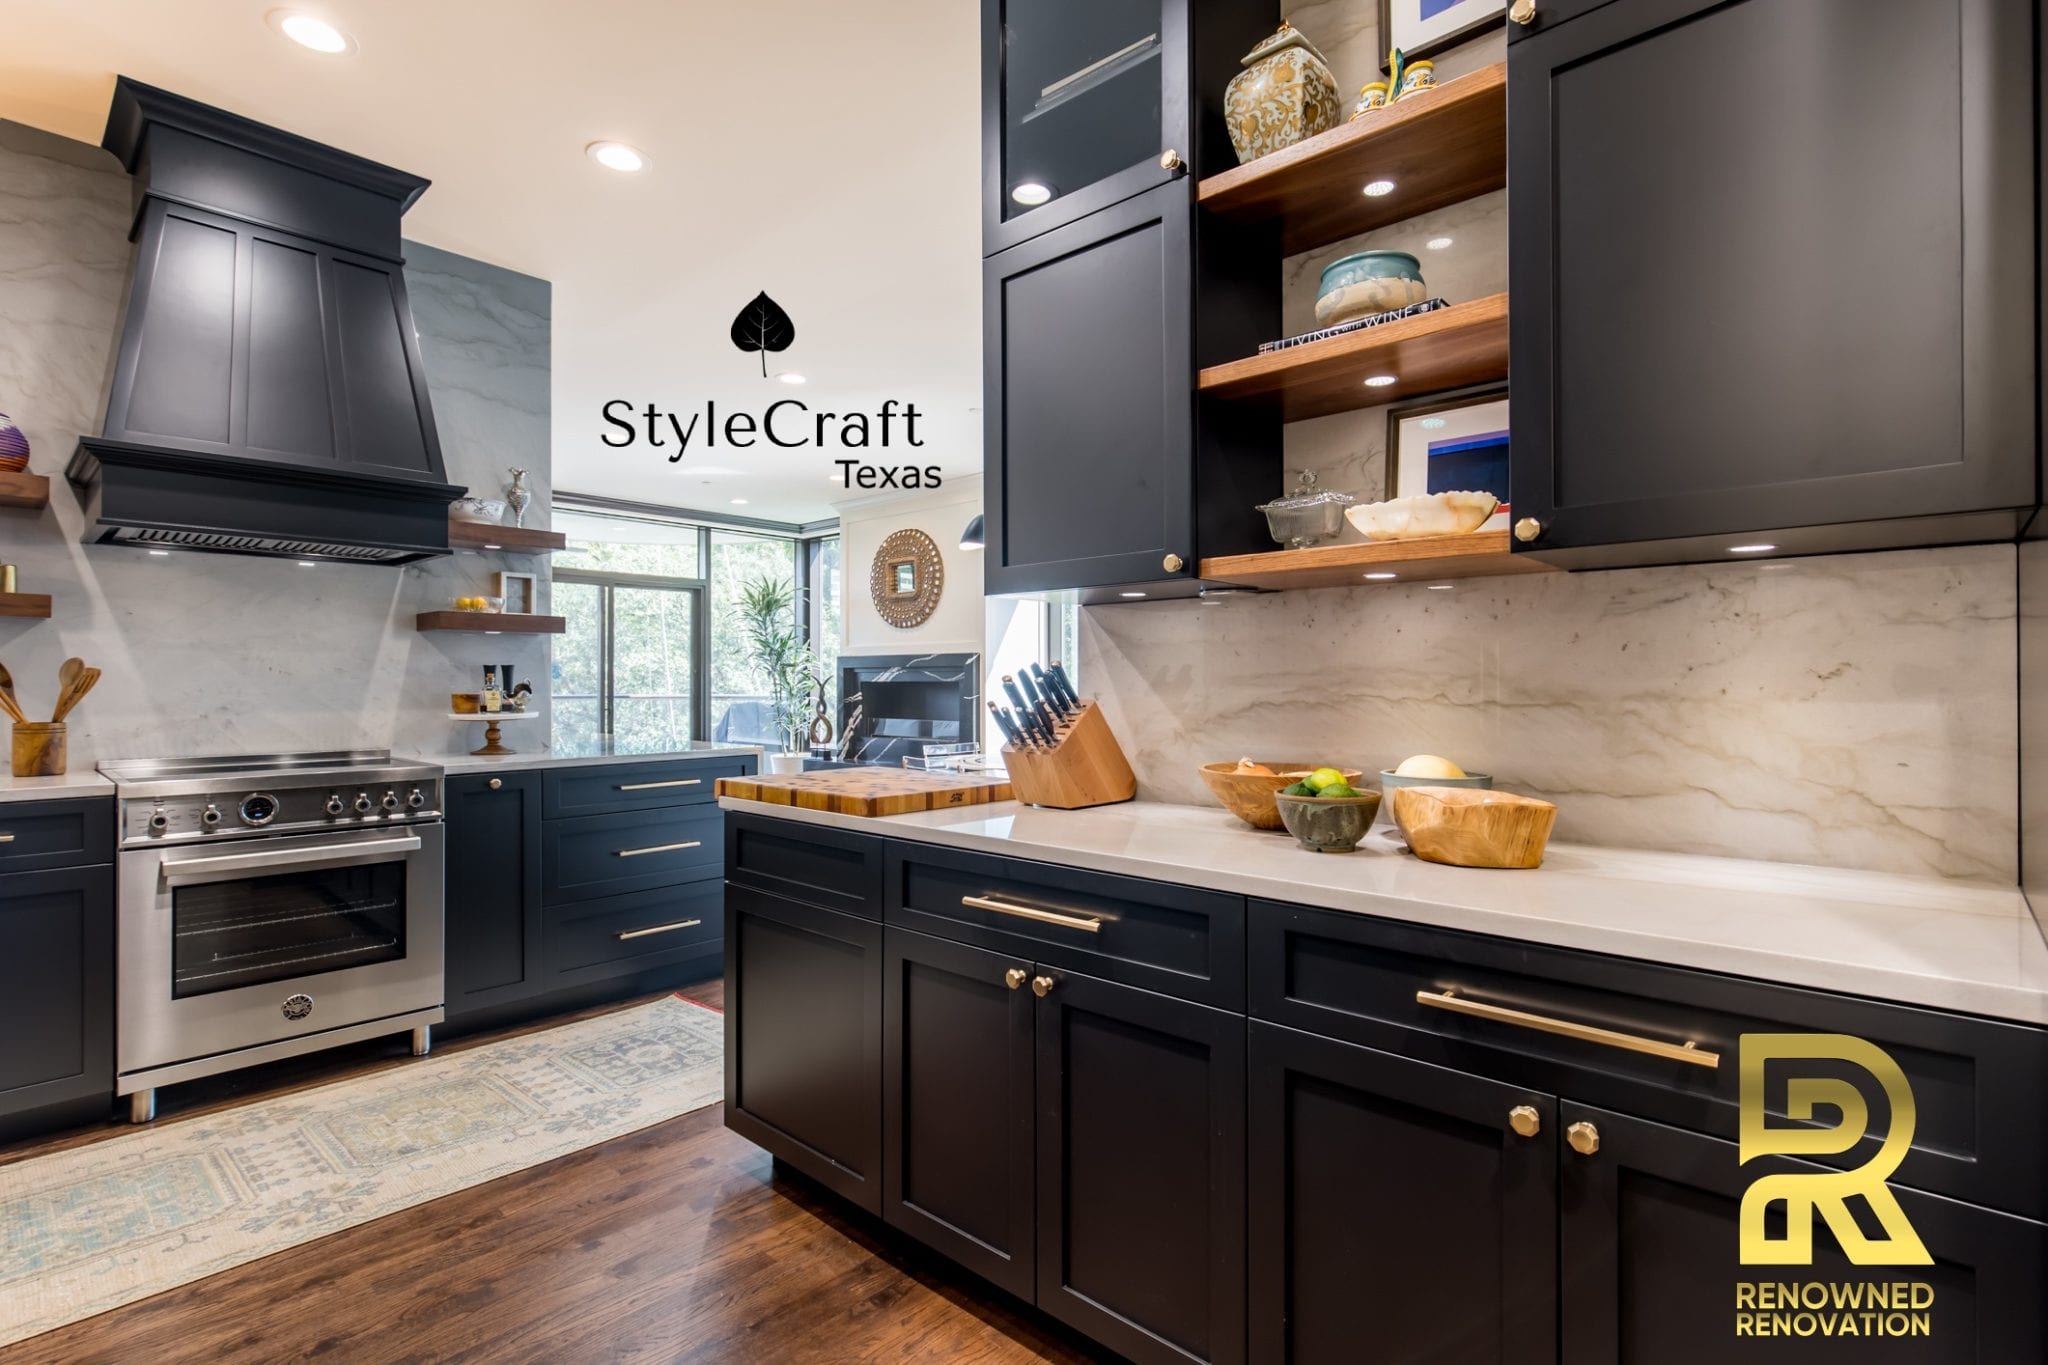 StyleCraft Cabinets Texas makes Custom Cabinetry